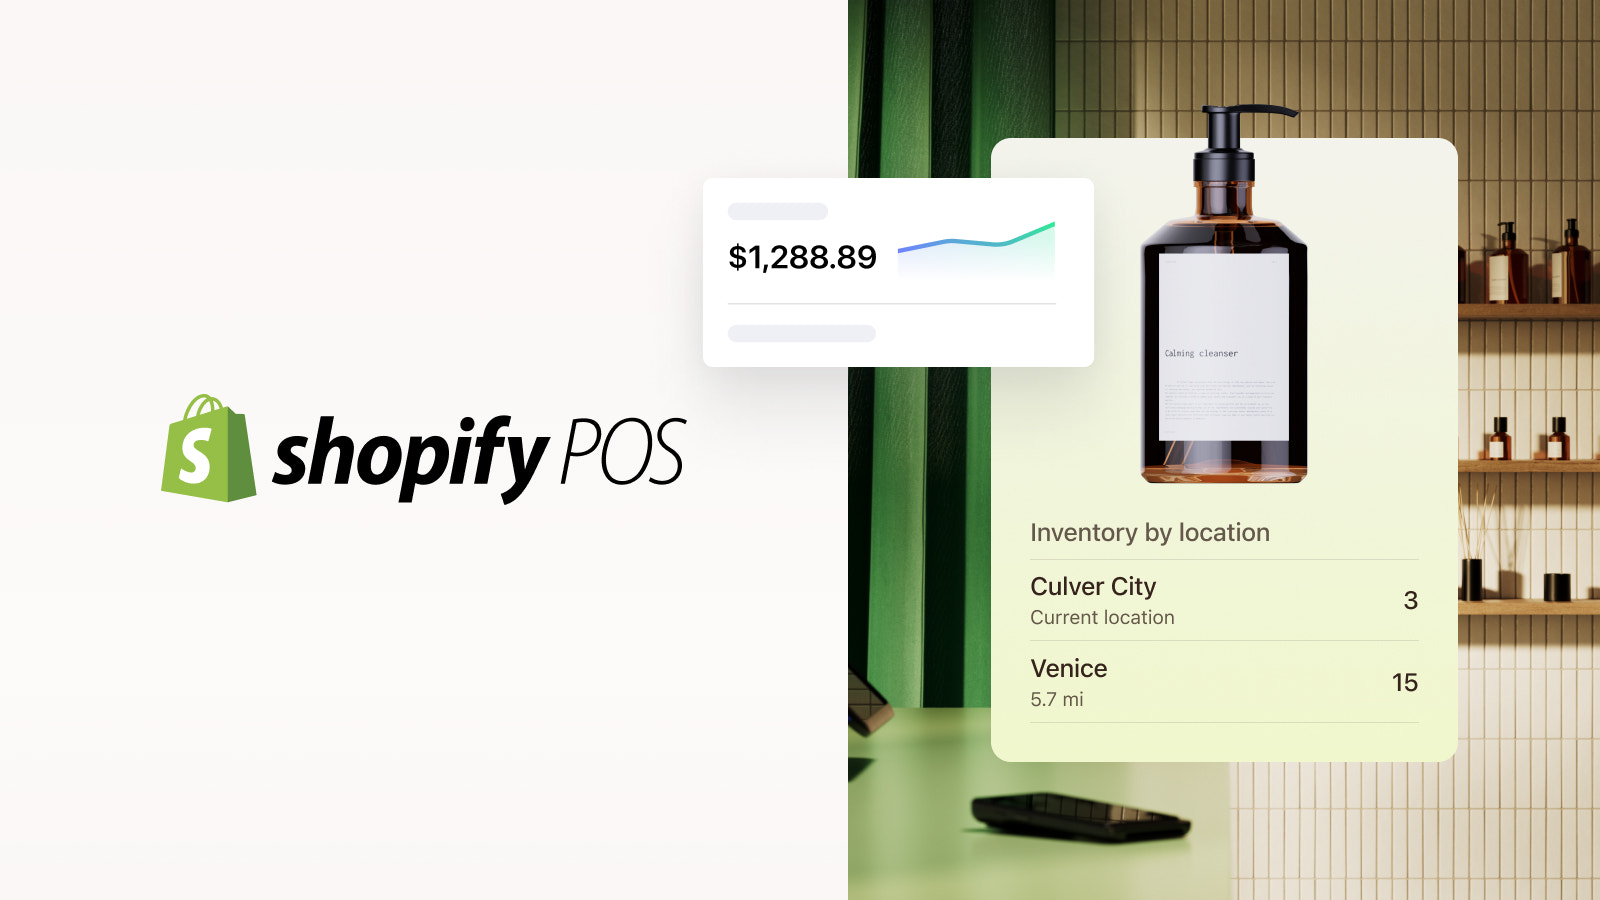 Shopify POS app available on iOS and Android devices